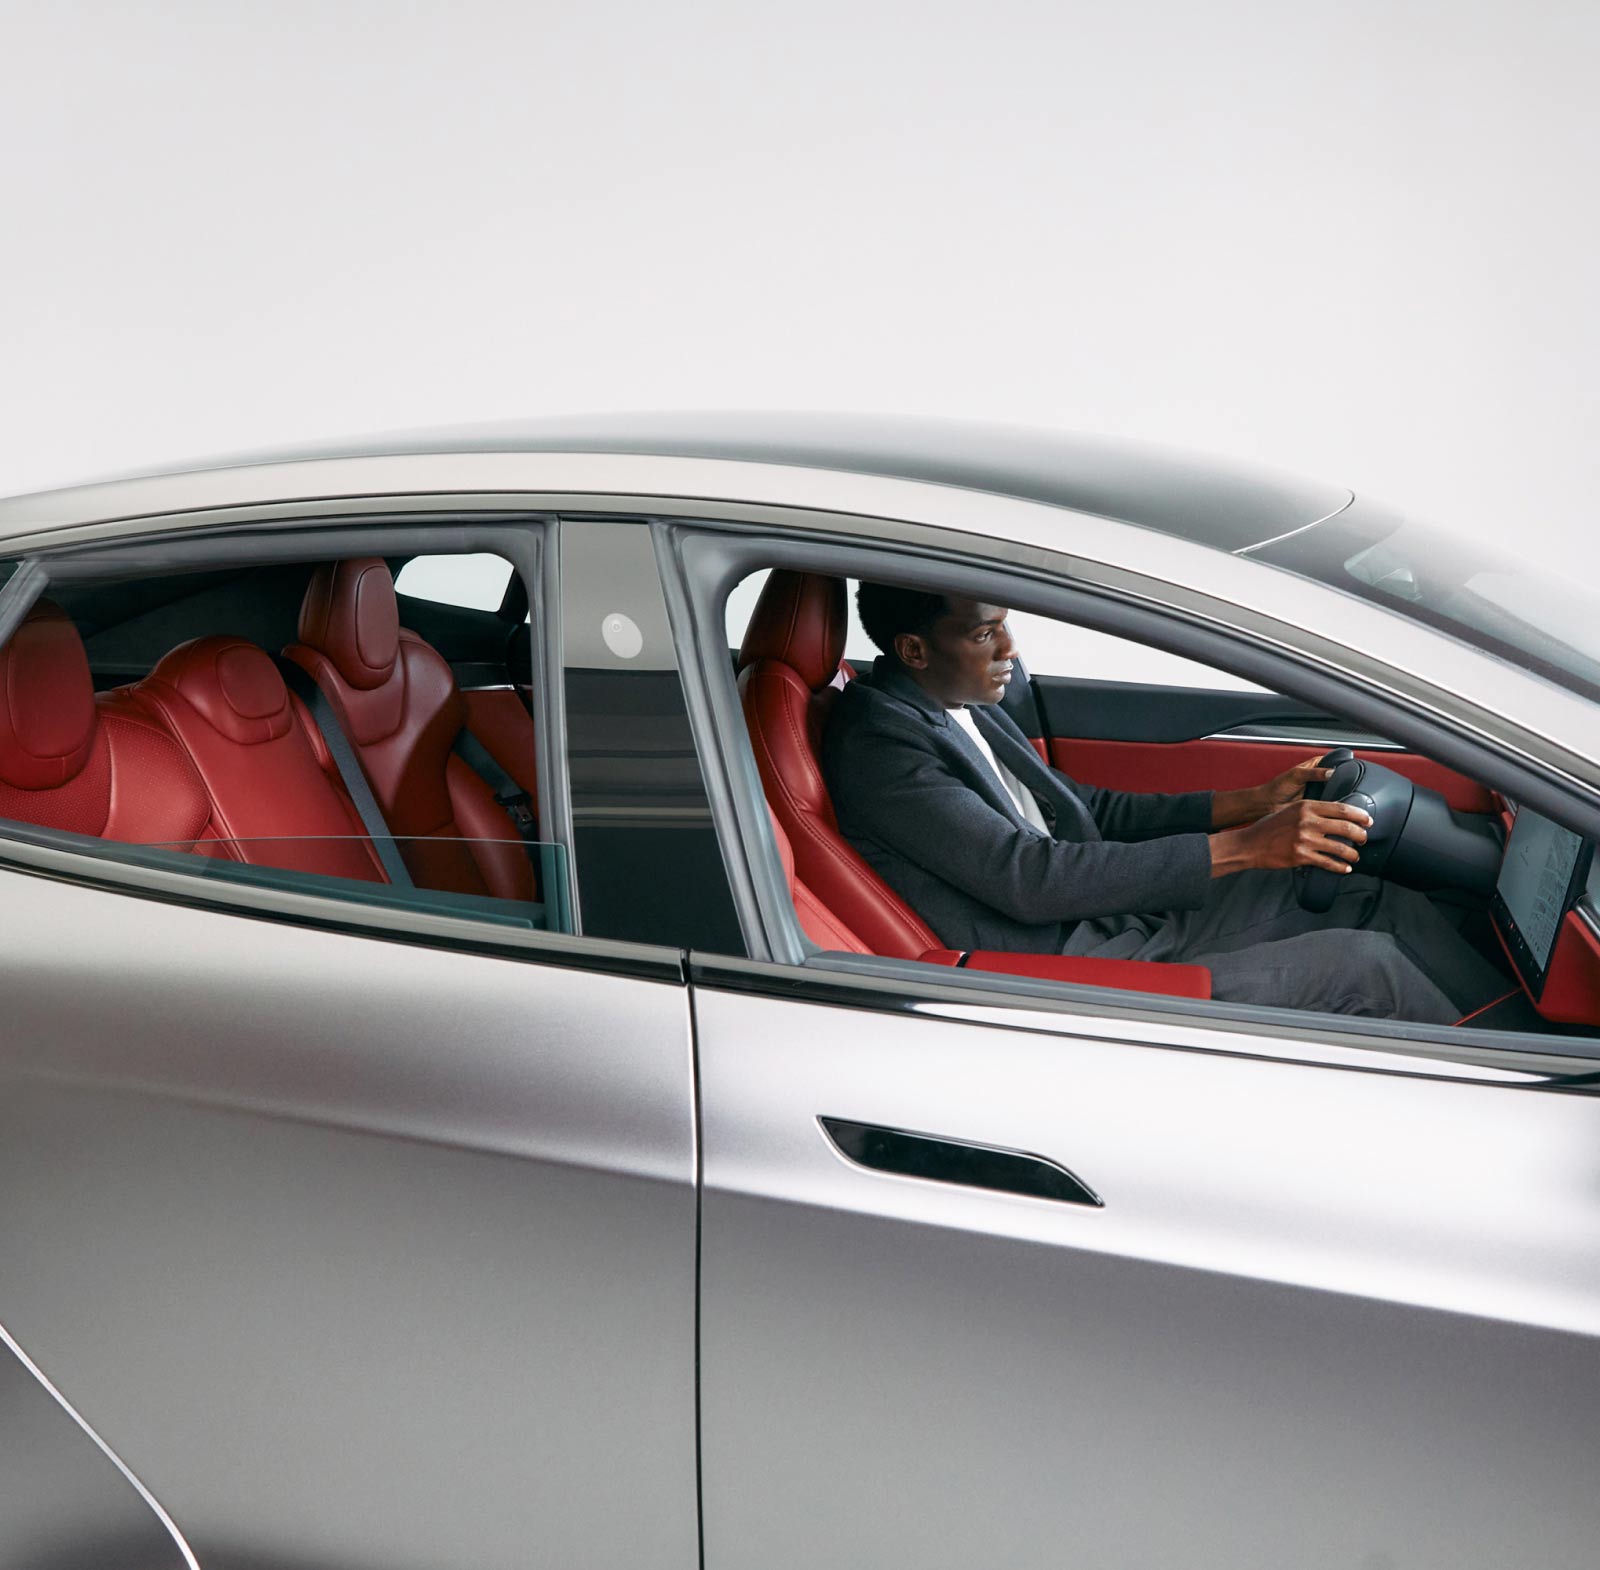 Crop of a silver Tesla Model S showing driver and custom Serrano Red interior